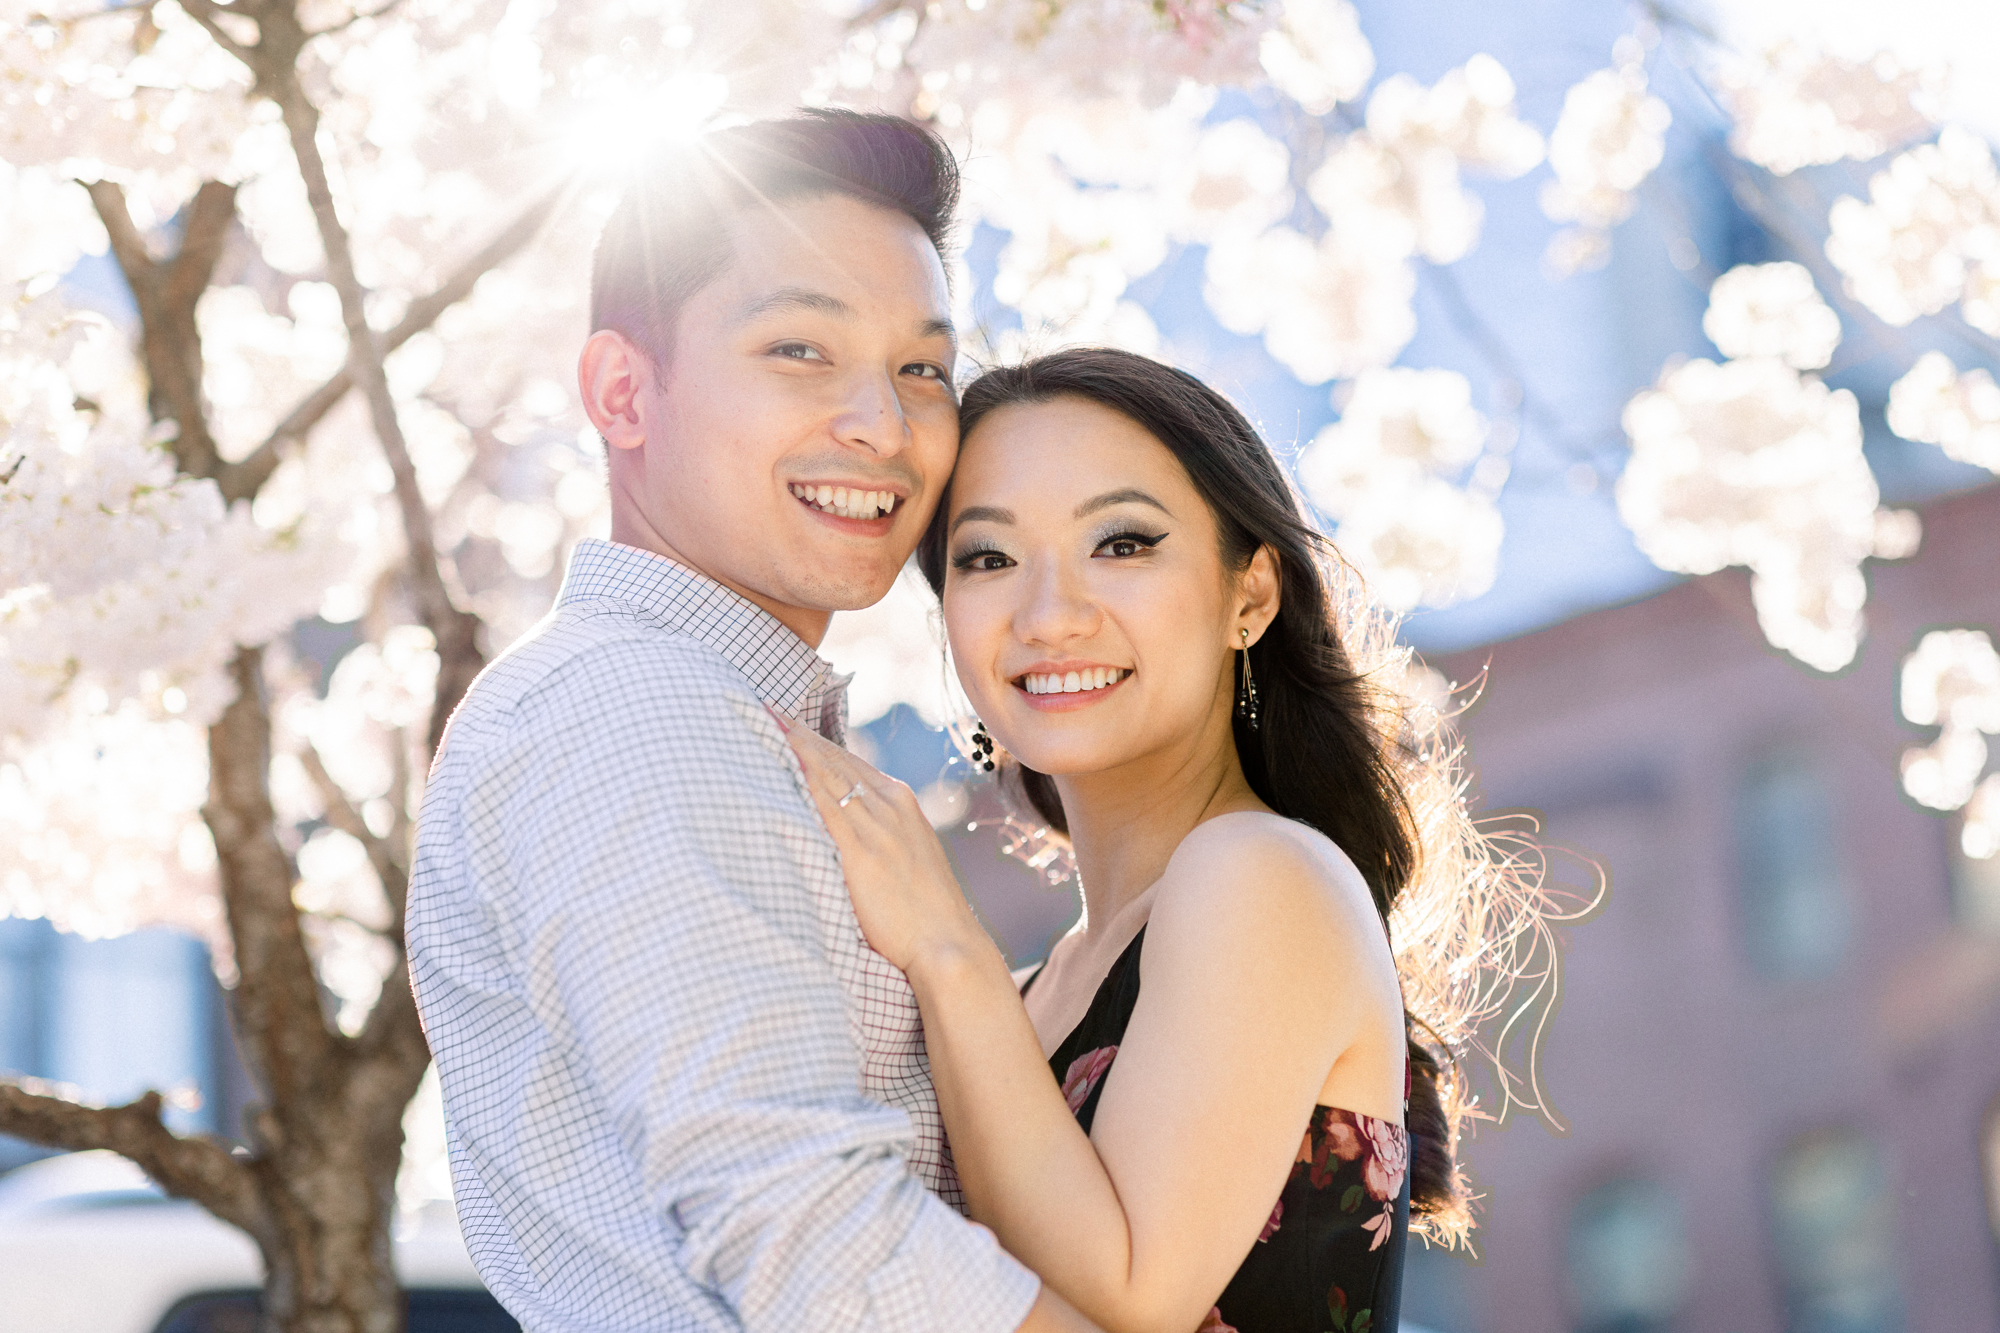 Glowing New York Engagement Photography with Spring Blossoms